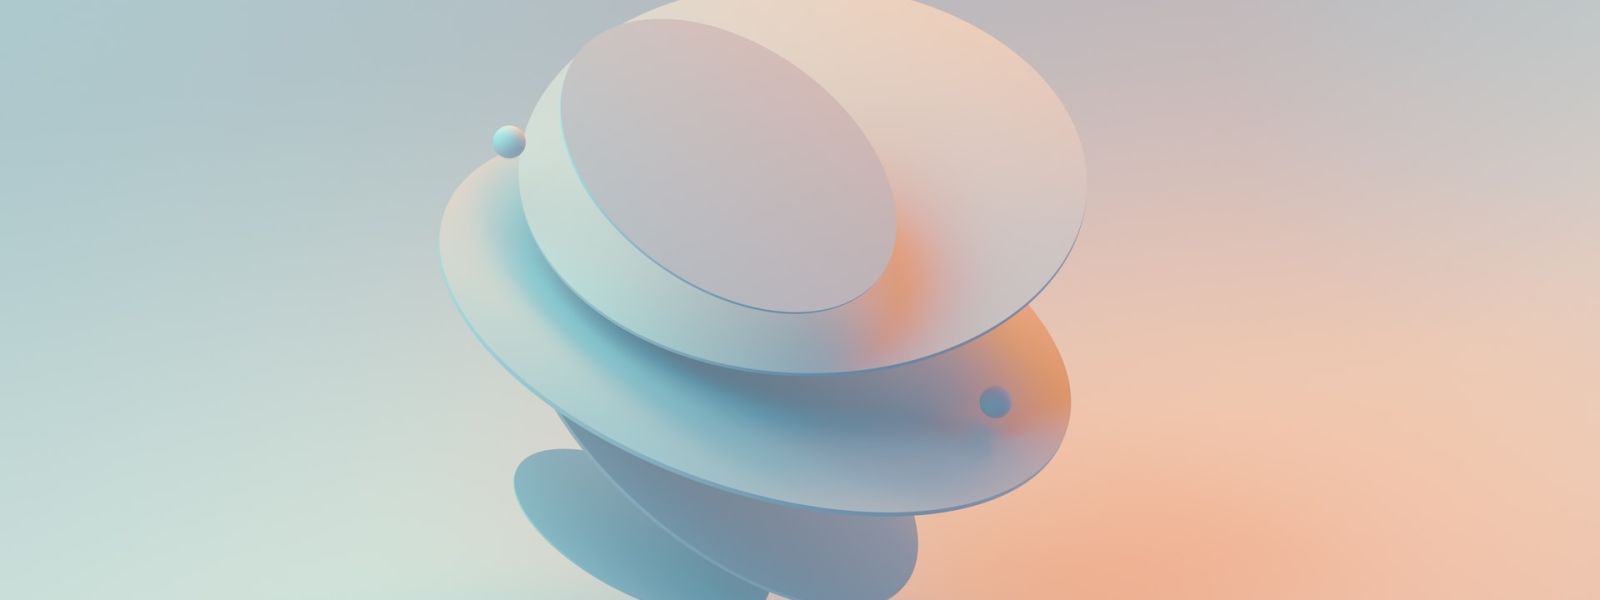 An AI render of 3D discs floating above a pale blue and orange background.